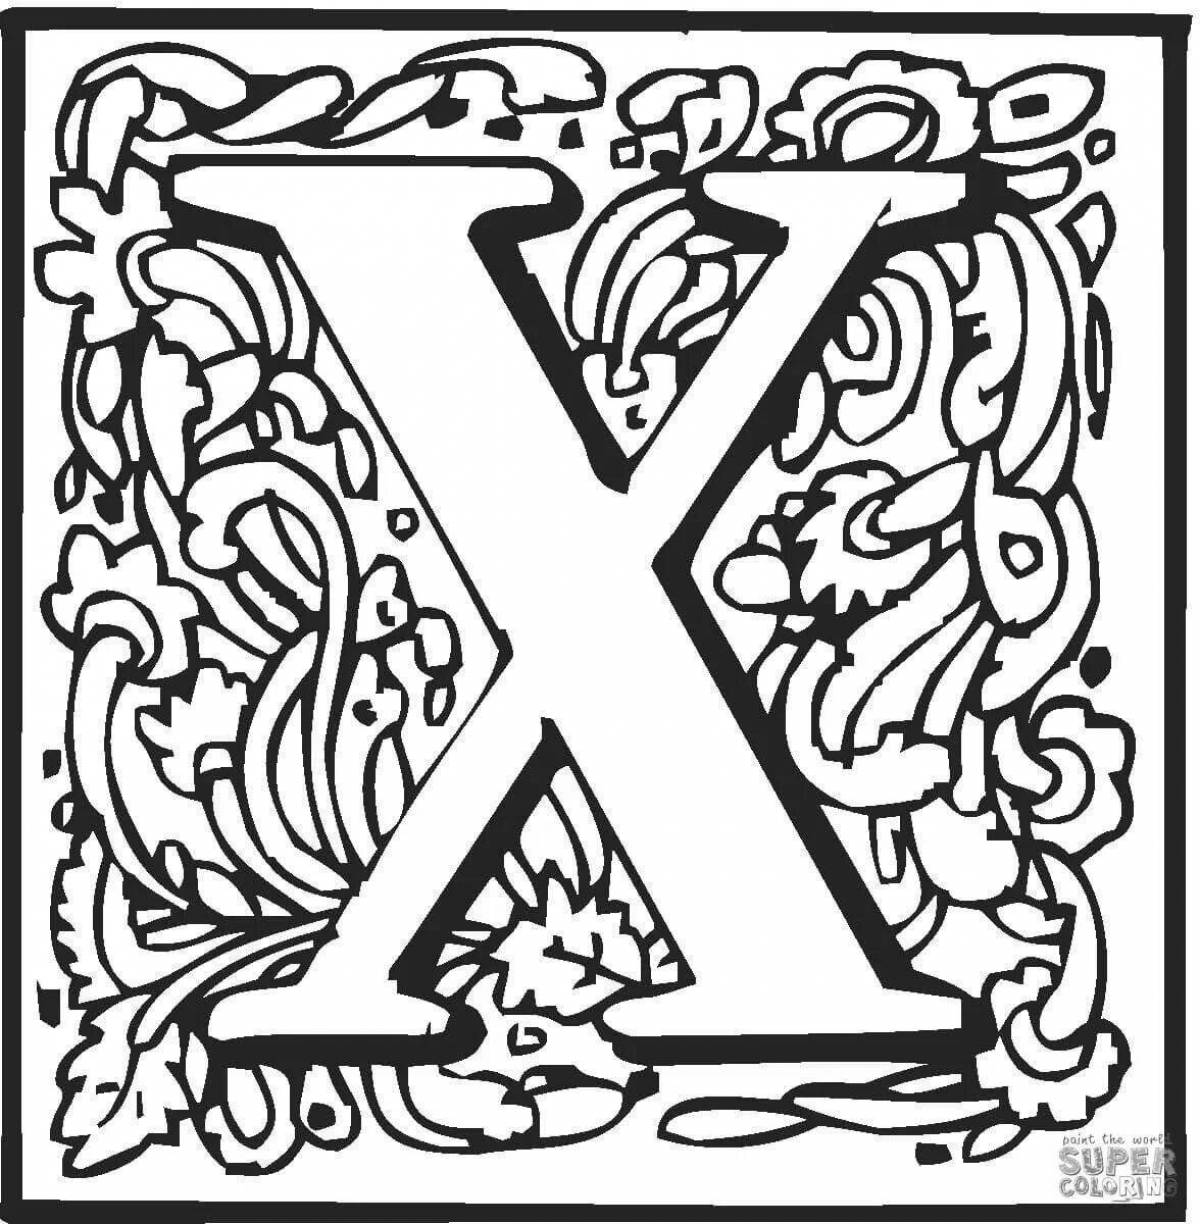 Fascinating coloring book letter a slavic